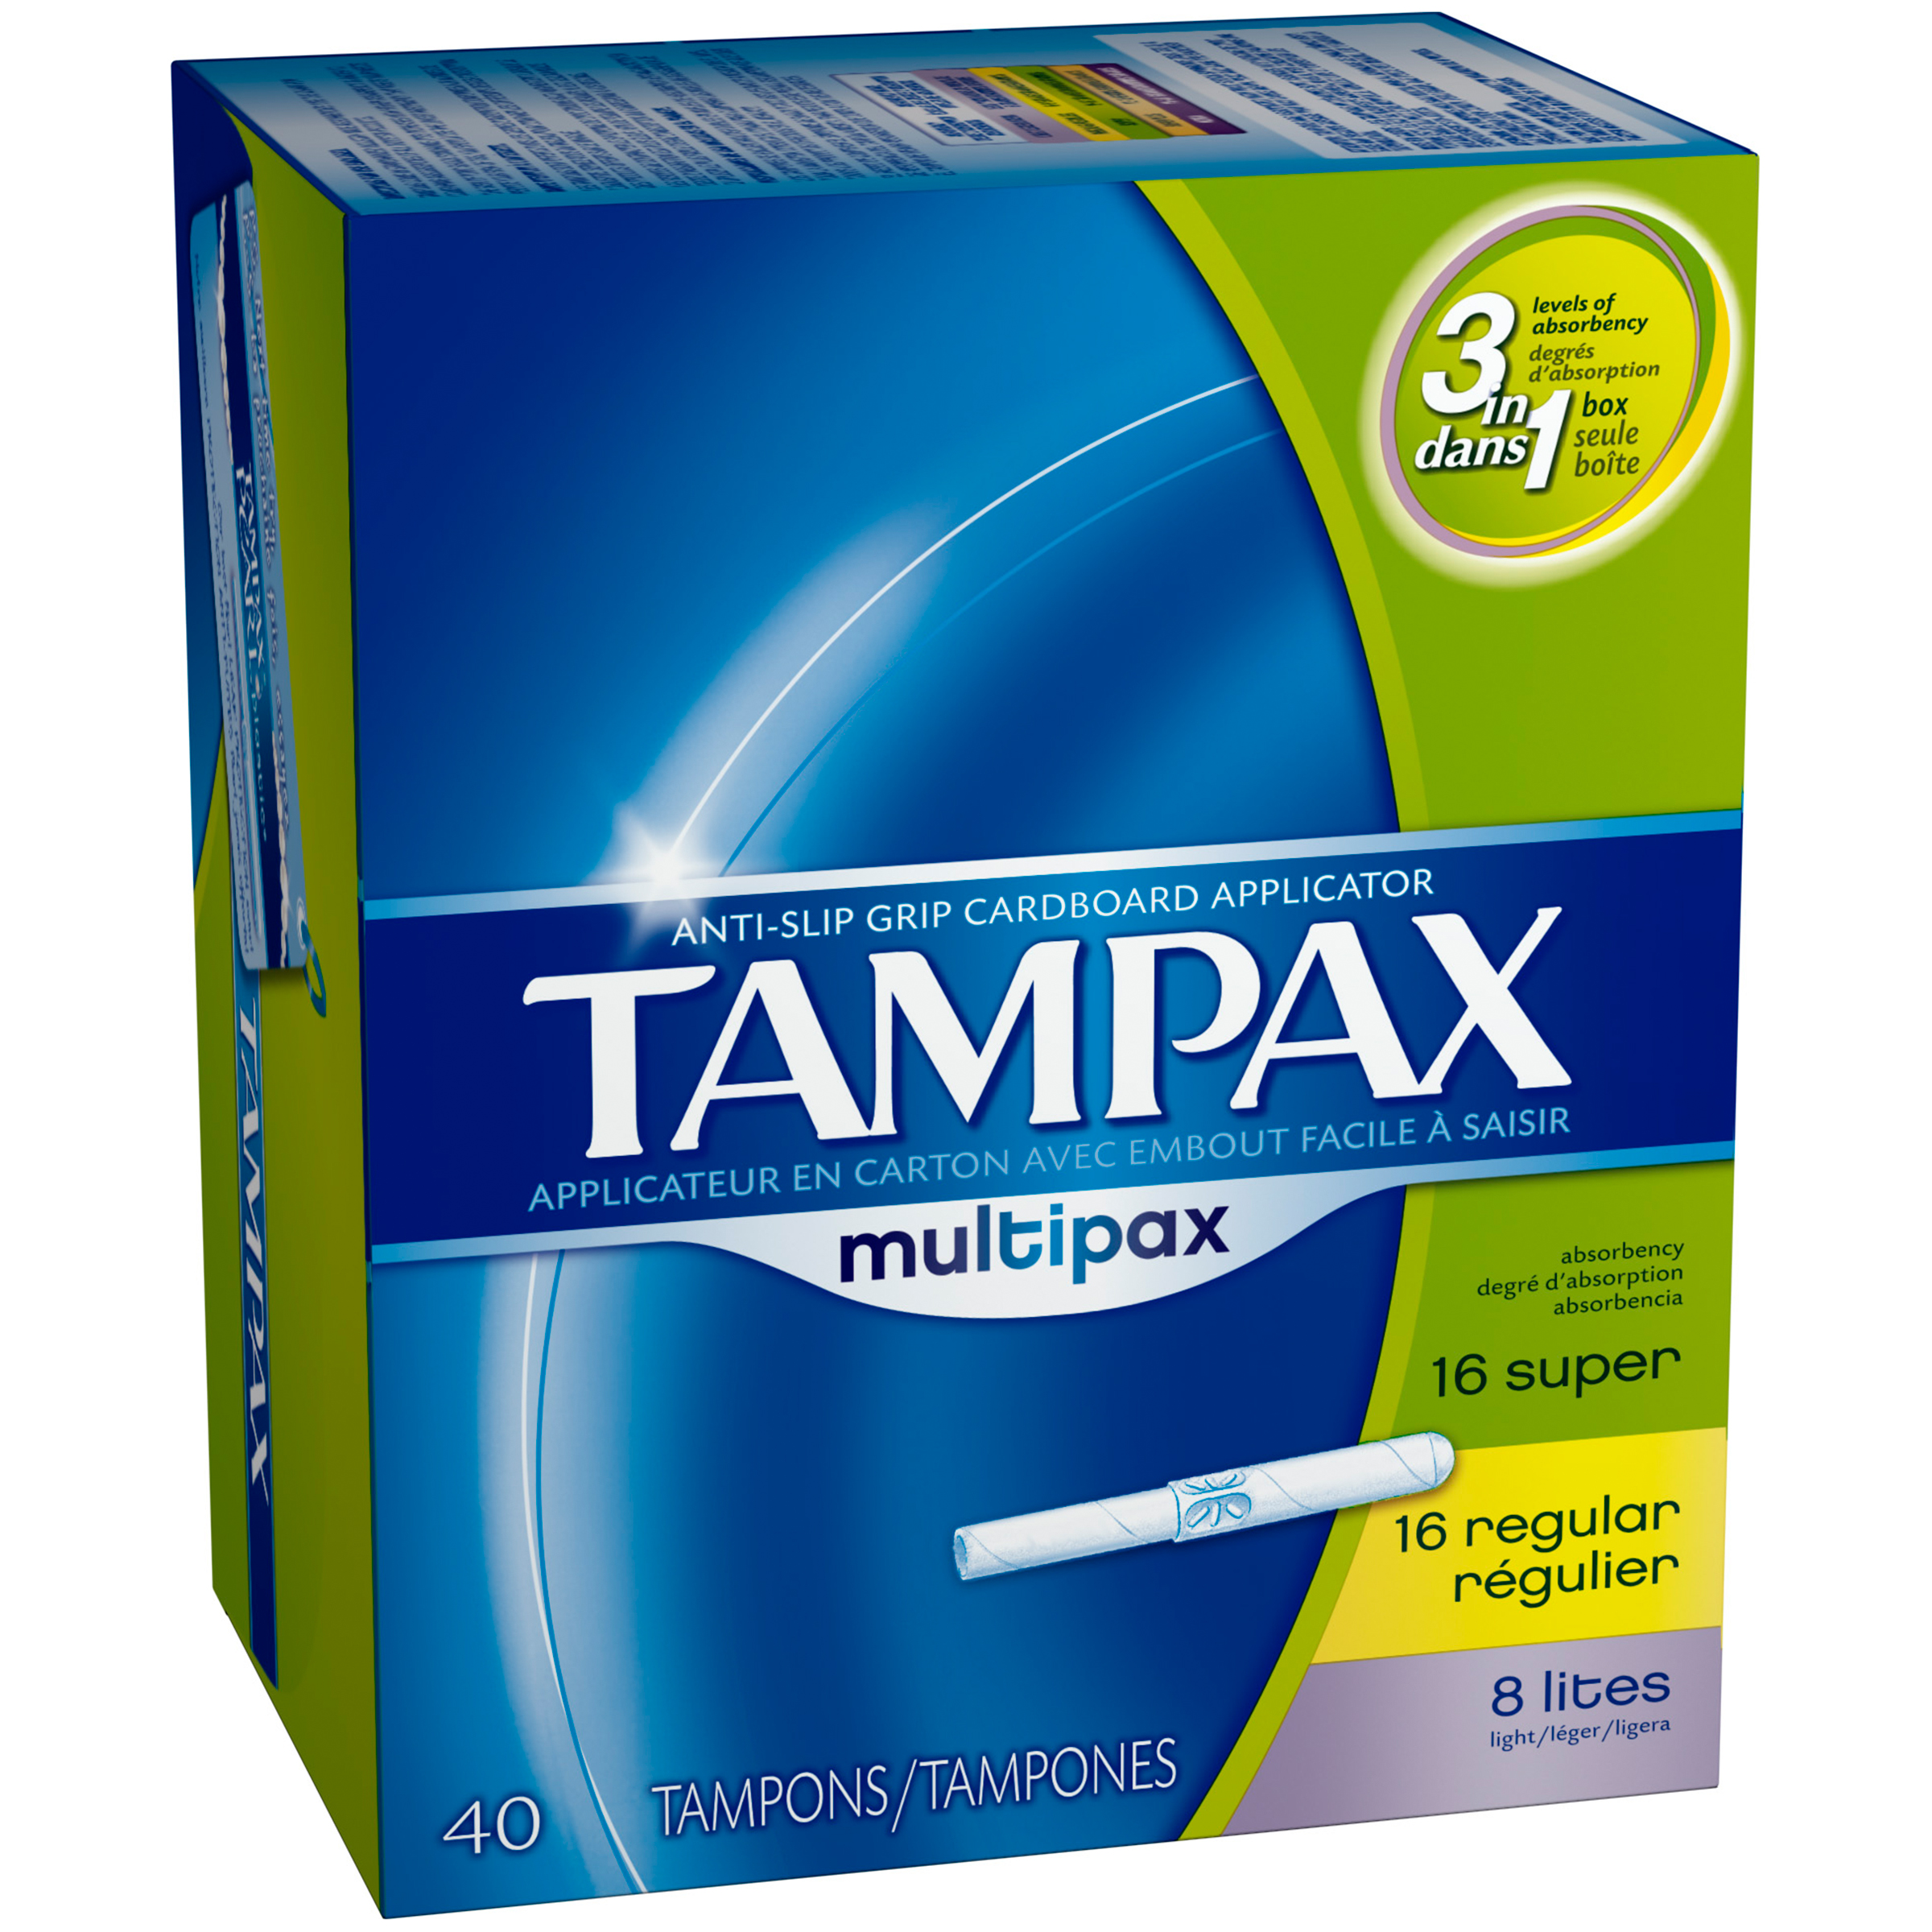 Tampax Multipax Cardboard Applicator Unscented Tampons 40 count